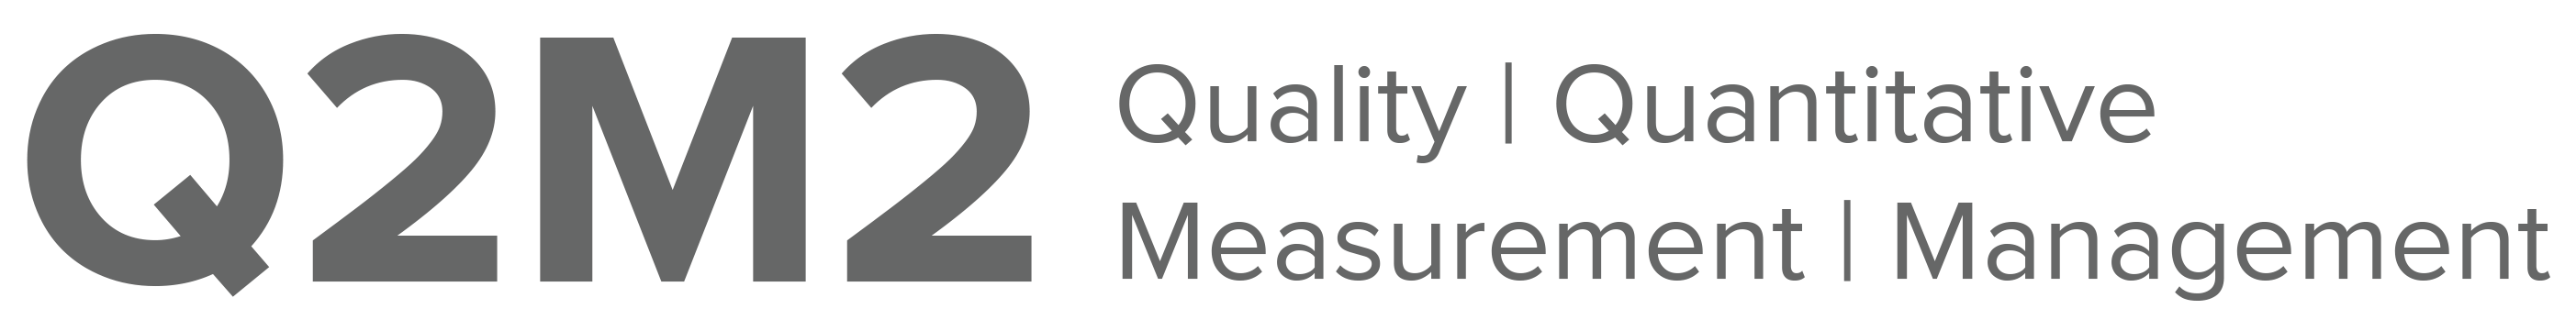 Q2M2 Data-driven Improvement of Your Organisation's Performance